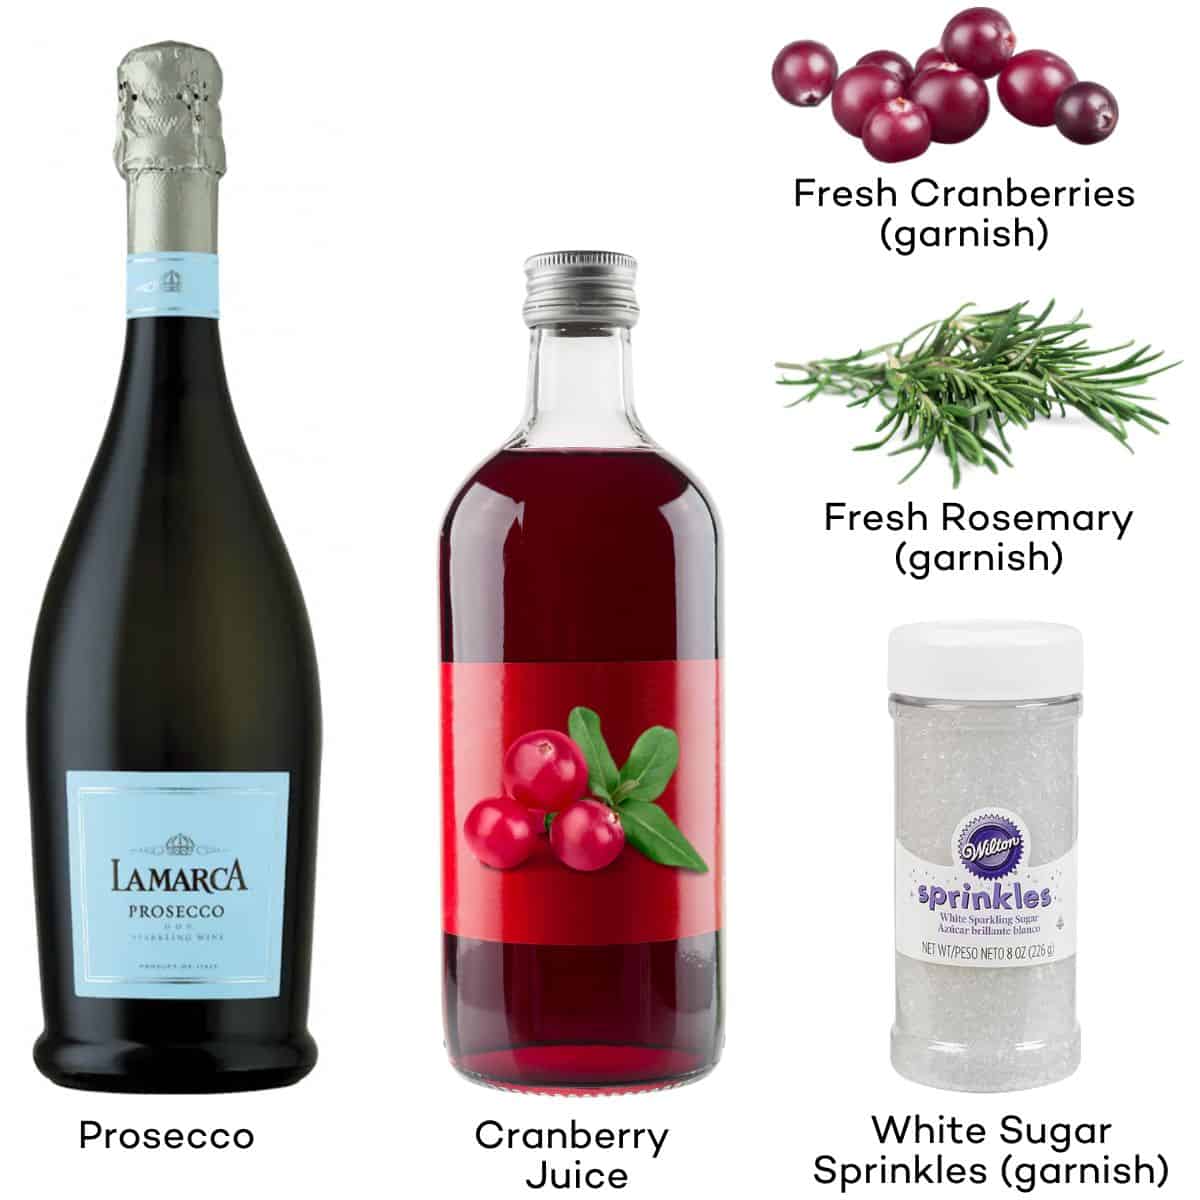 Ingredients for cranberry mimosas - prosecco, cranberry juice. For garnish - fresh cranberries, fresh rosemary, sugar sprinkles.